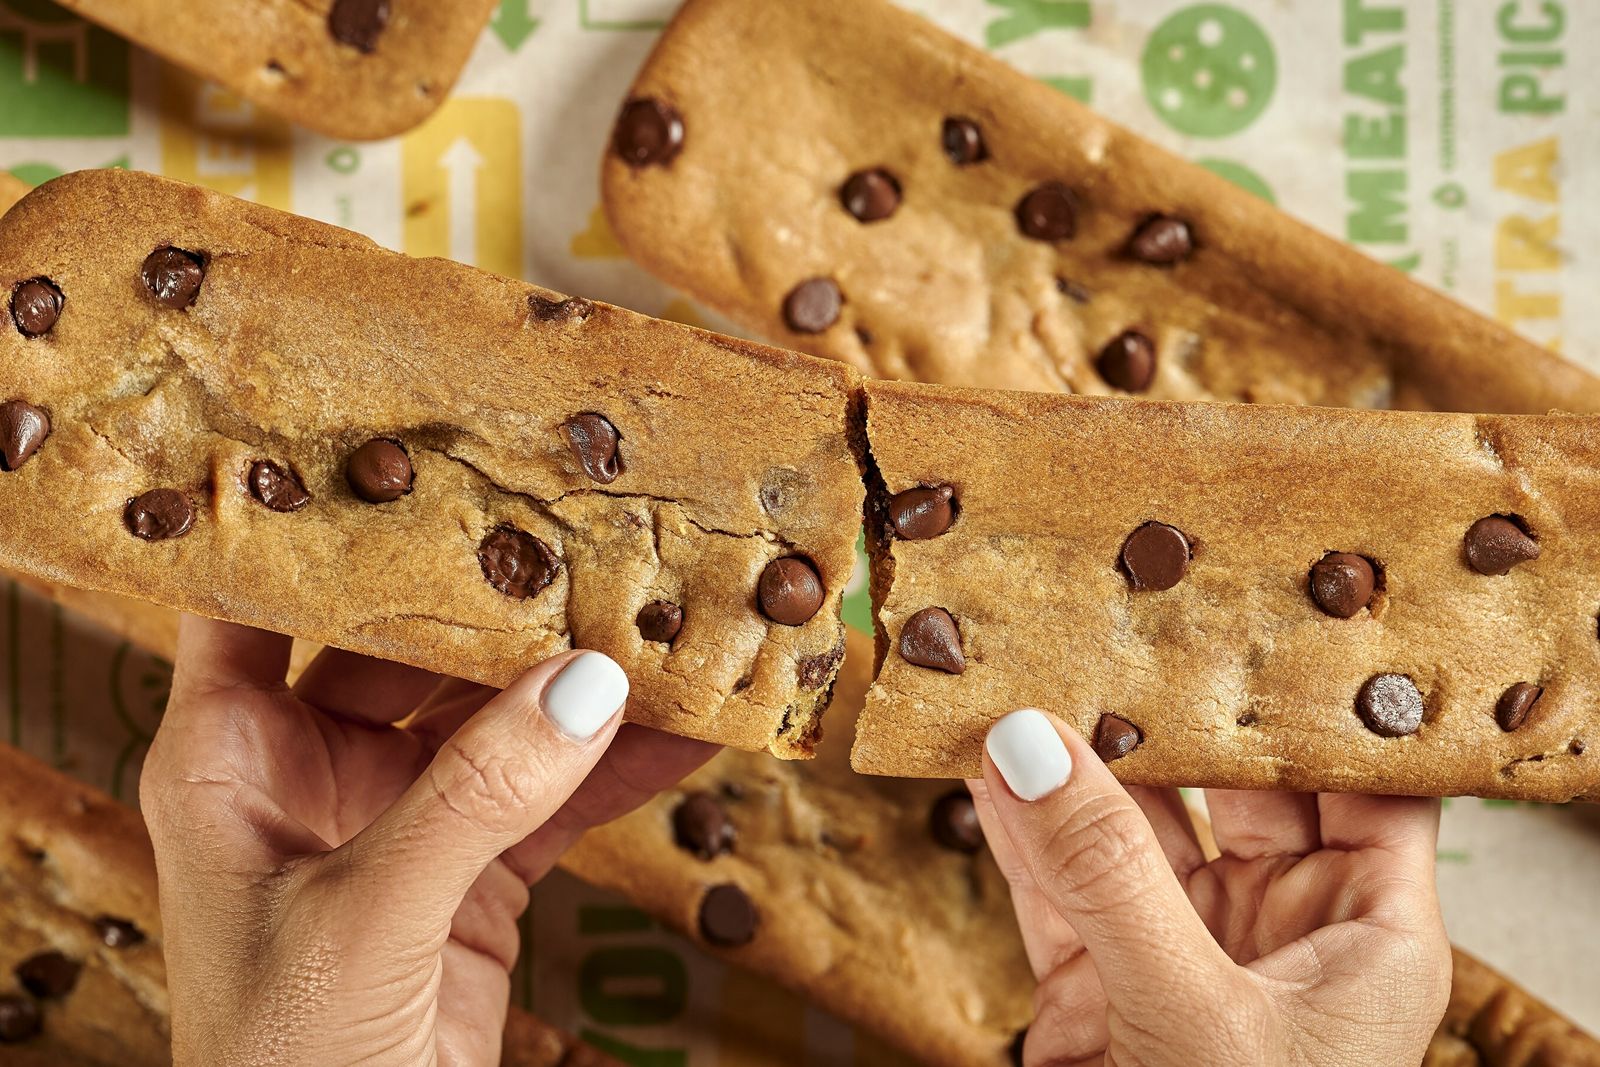 Subway Celebrates National Cookie Day in a Big Way With a Sneak Peek of Its New Footlong Cookie